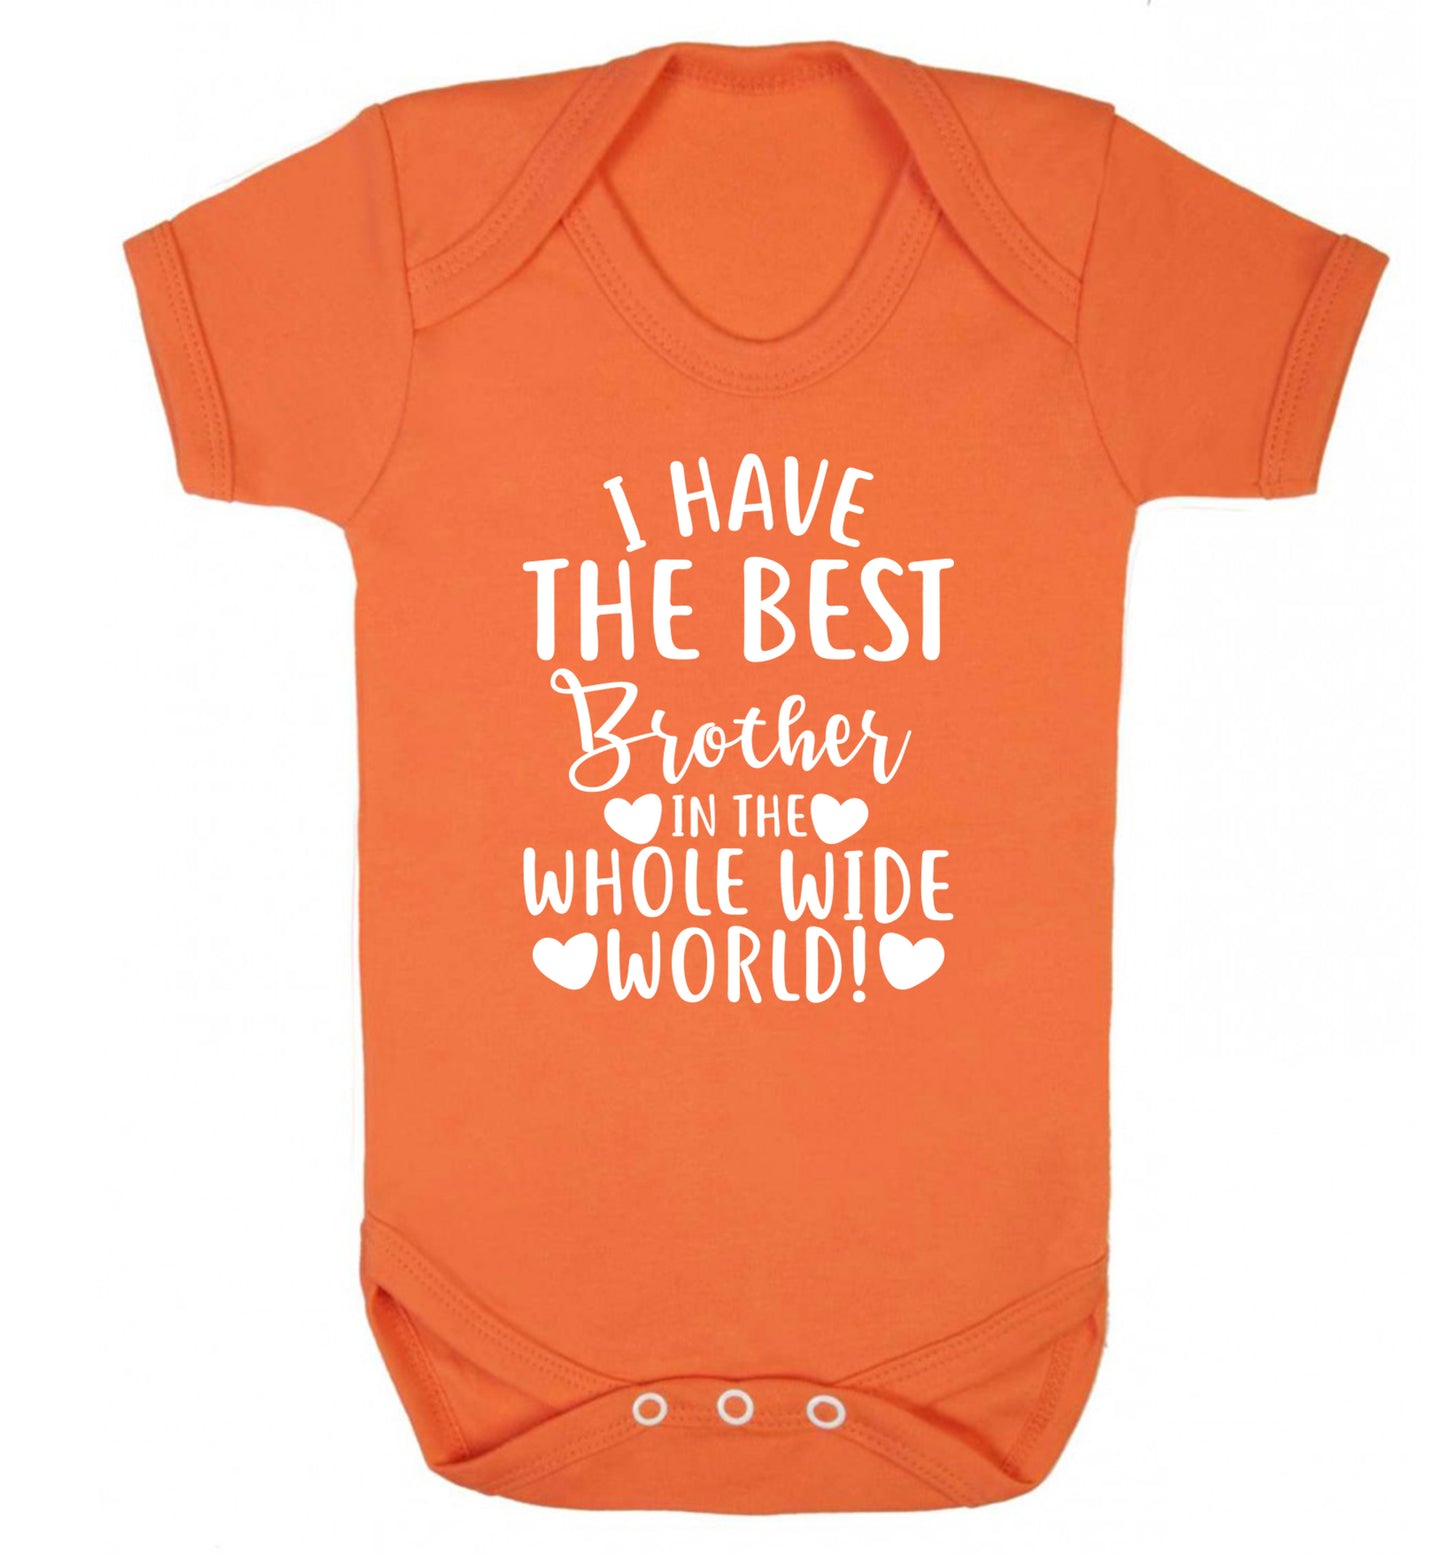 I have the best brother in the whole wide world! Baby Vest orange 18-24 months